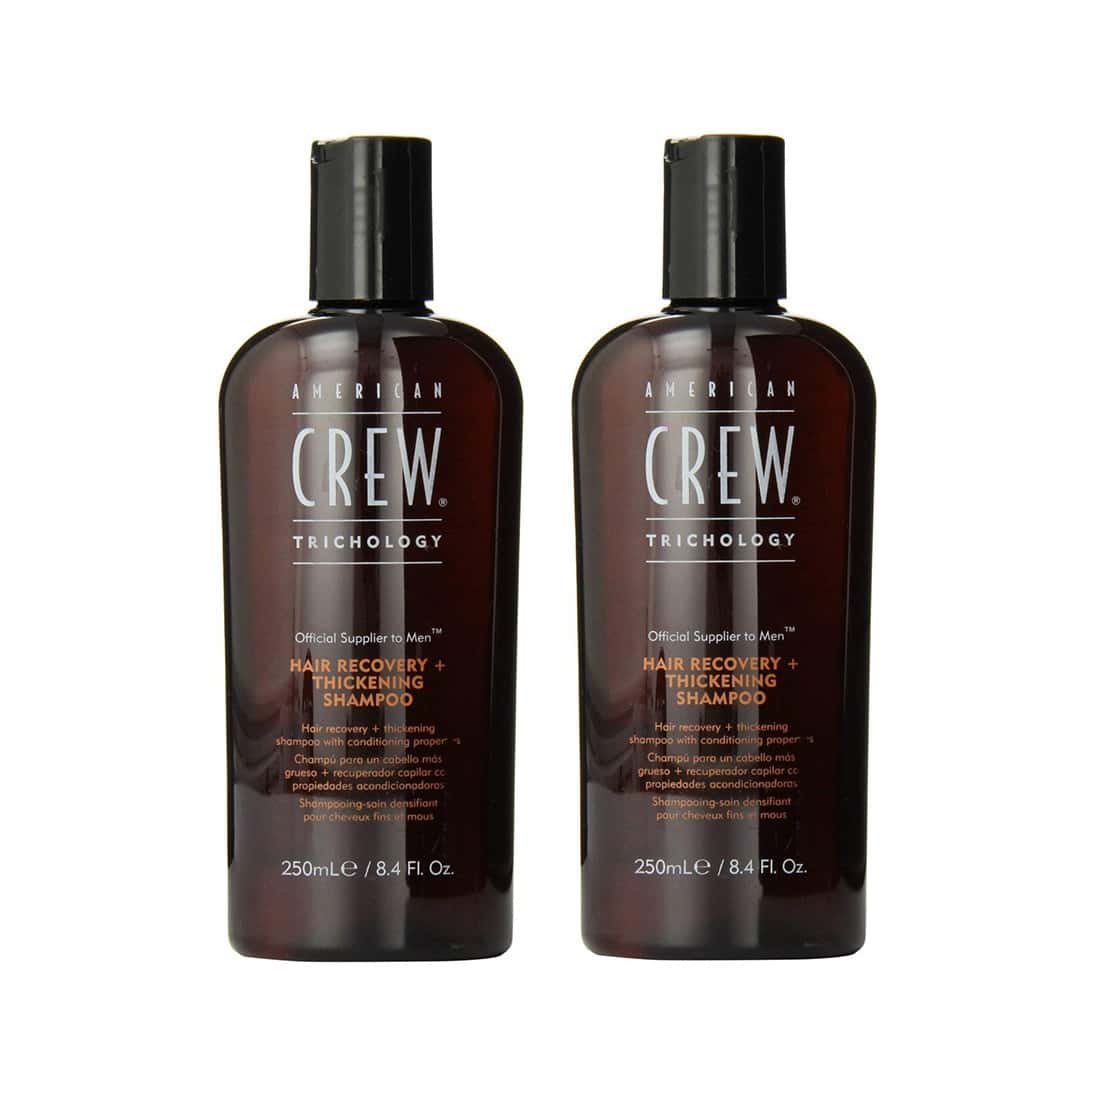 2-pack American Crew Hair Recovery + Thickening Shampoo 250ml